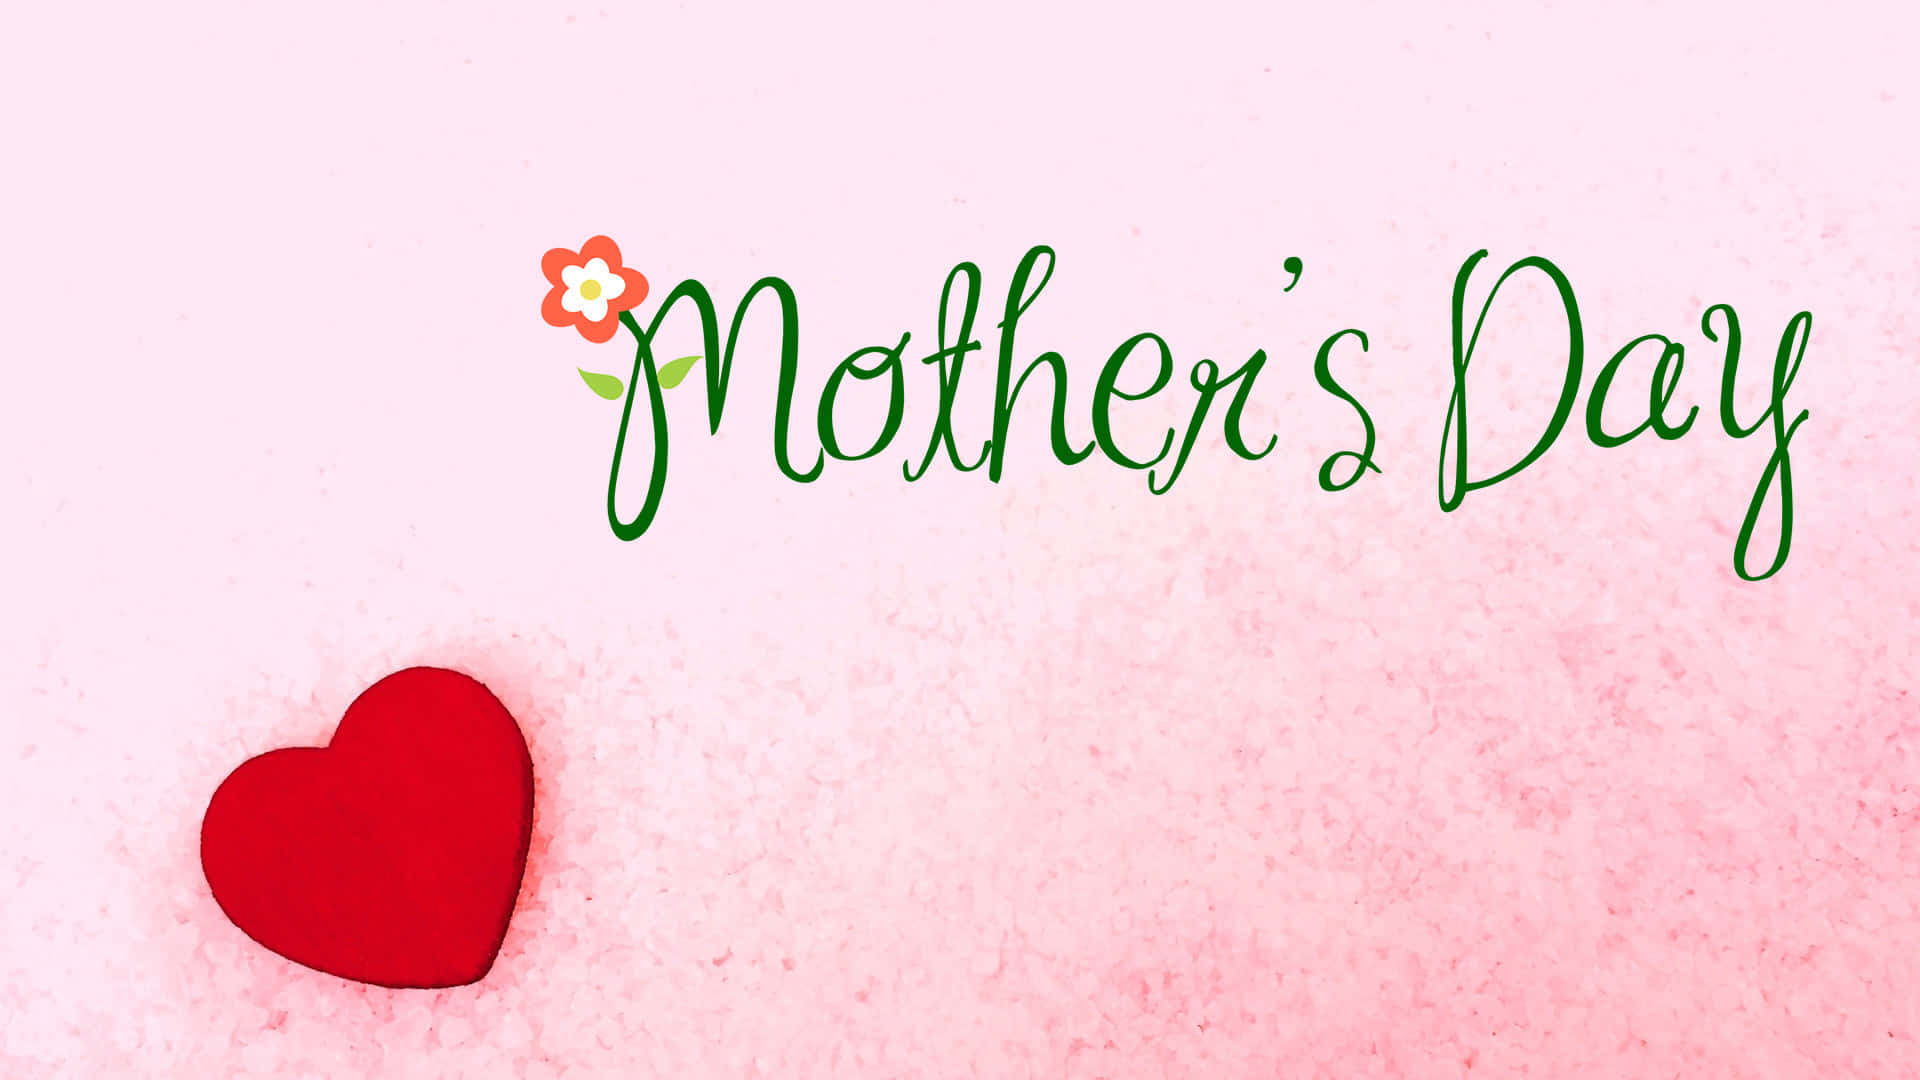 "Today and every day, wishing you the happiest of Mother's Days" Wallpaper